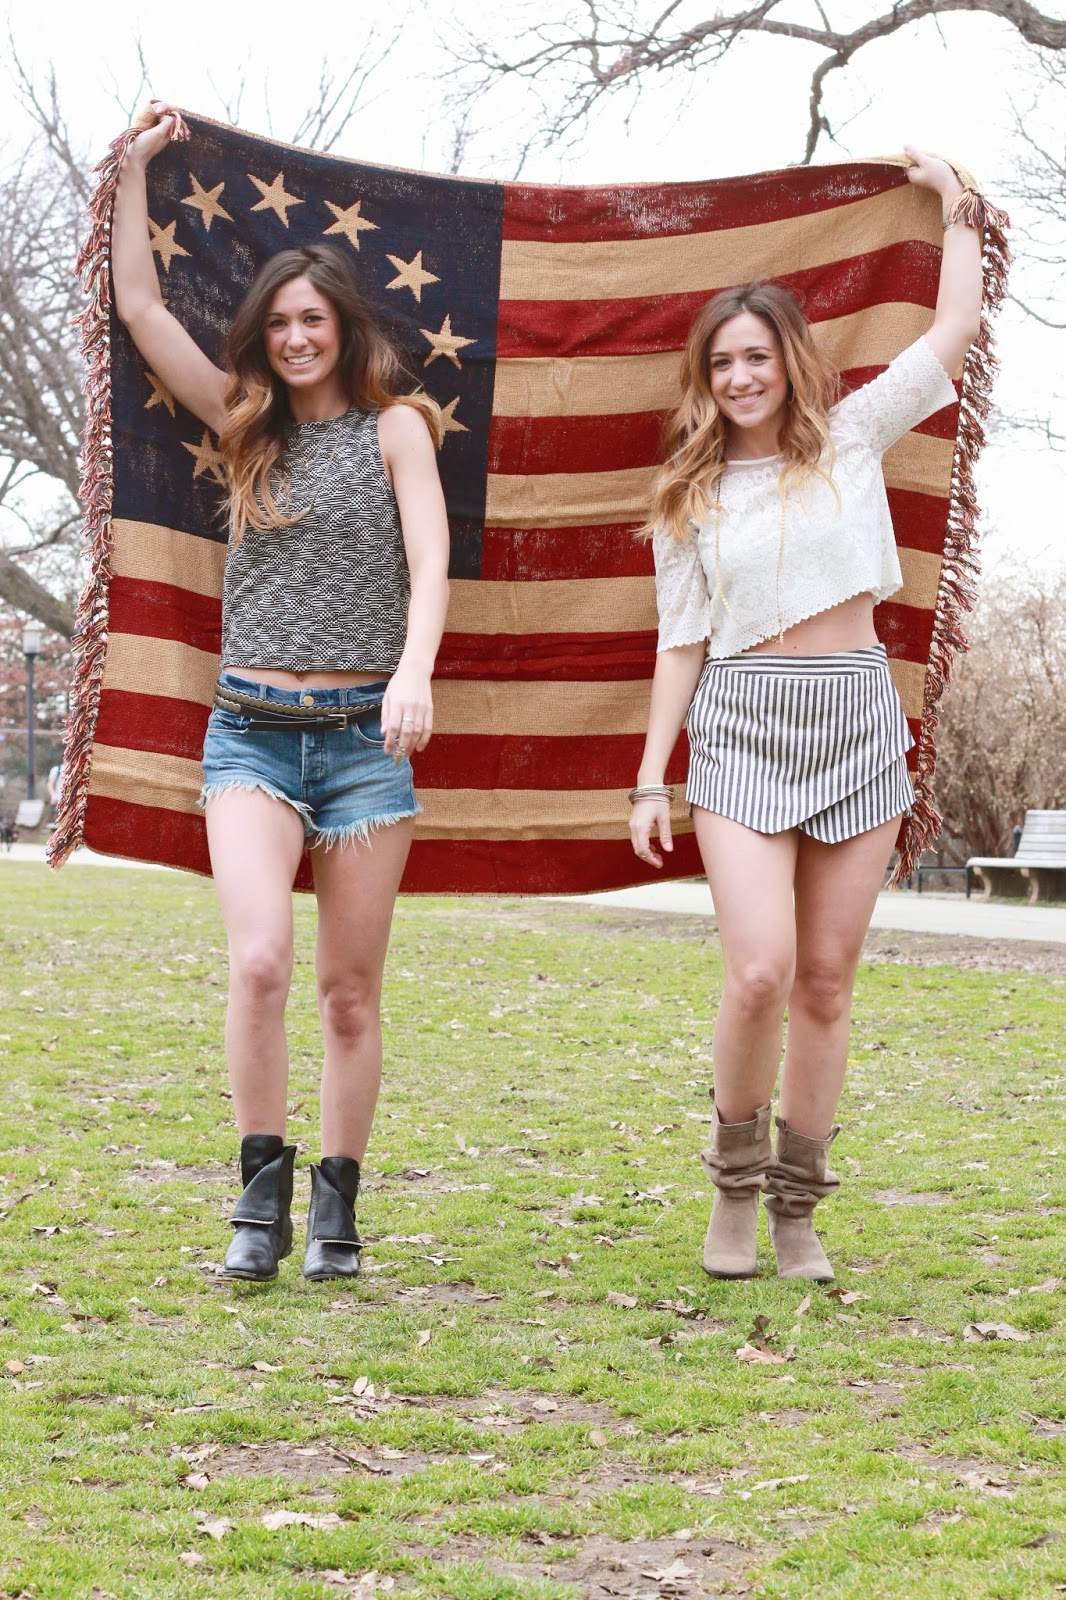 festival style, festival fashion, festival outfit inspiration and ideas, south moon under, bloggers, sisters